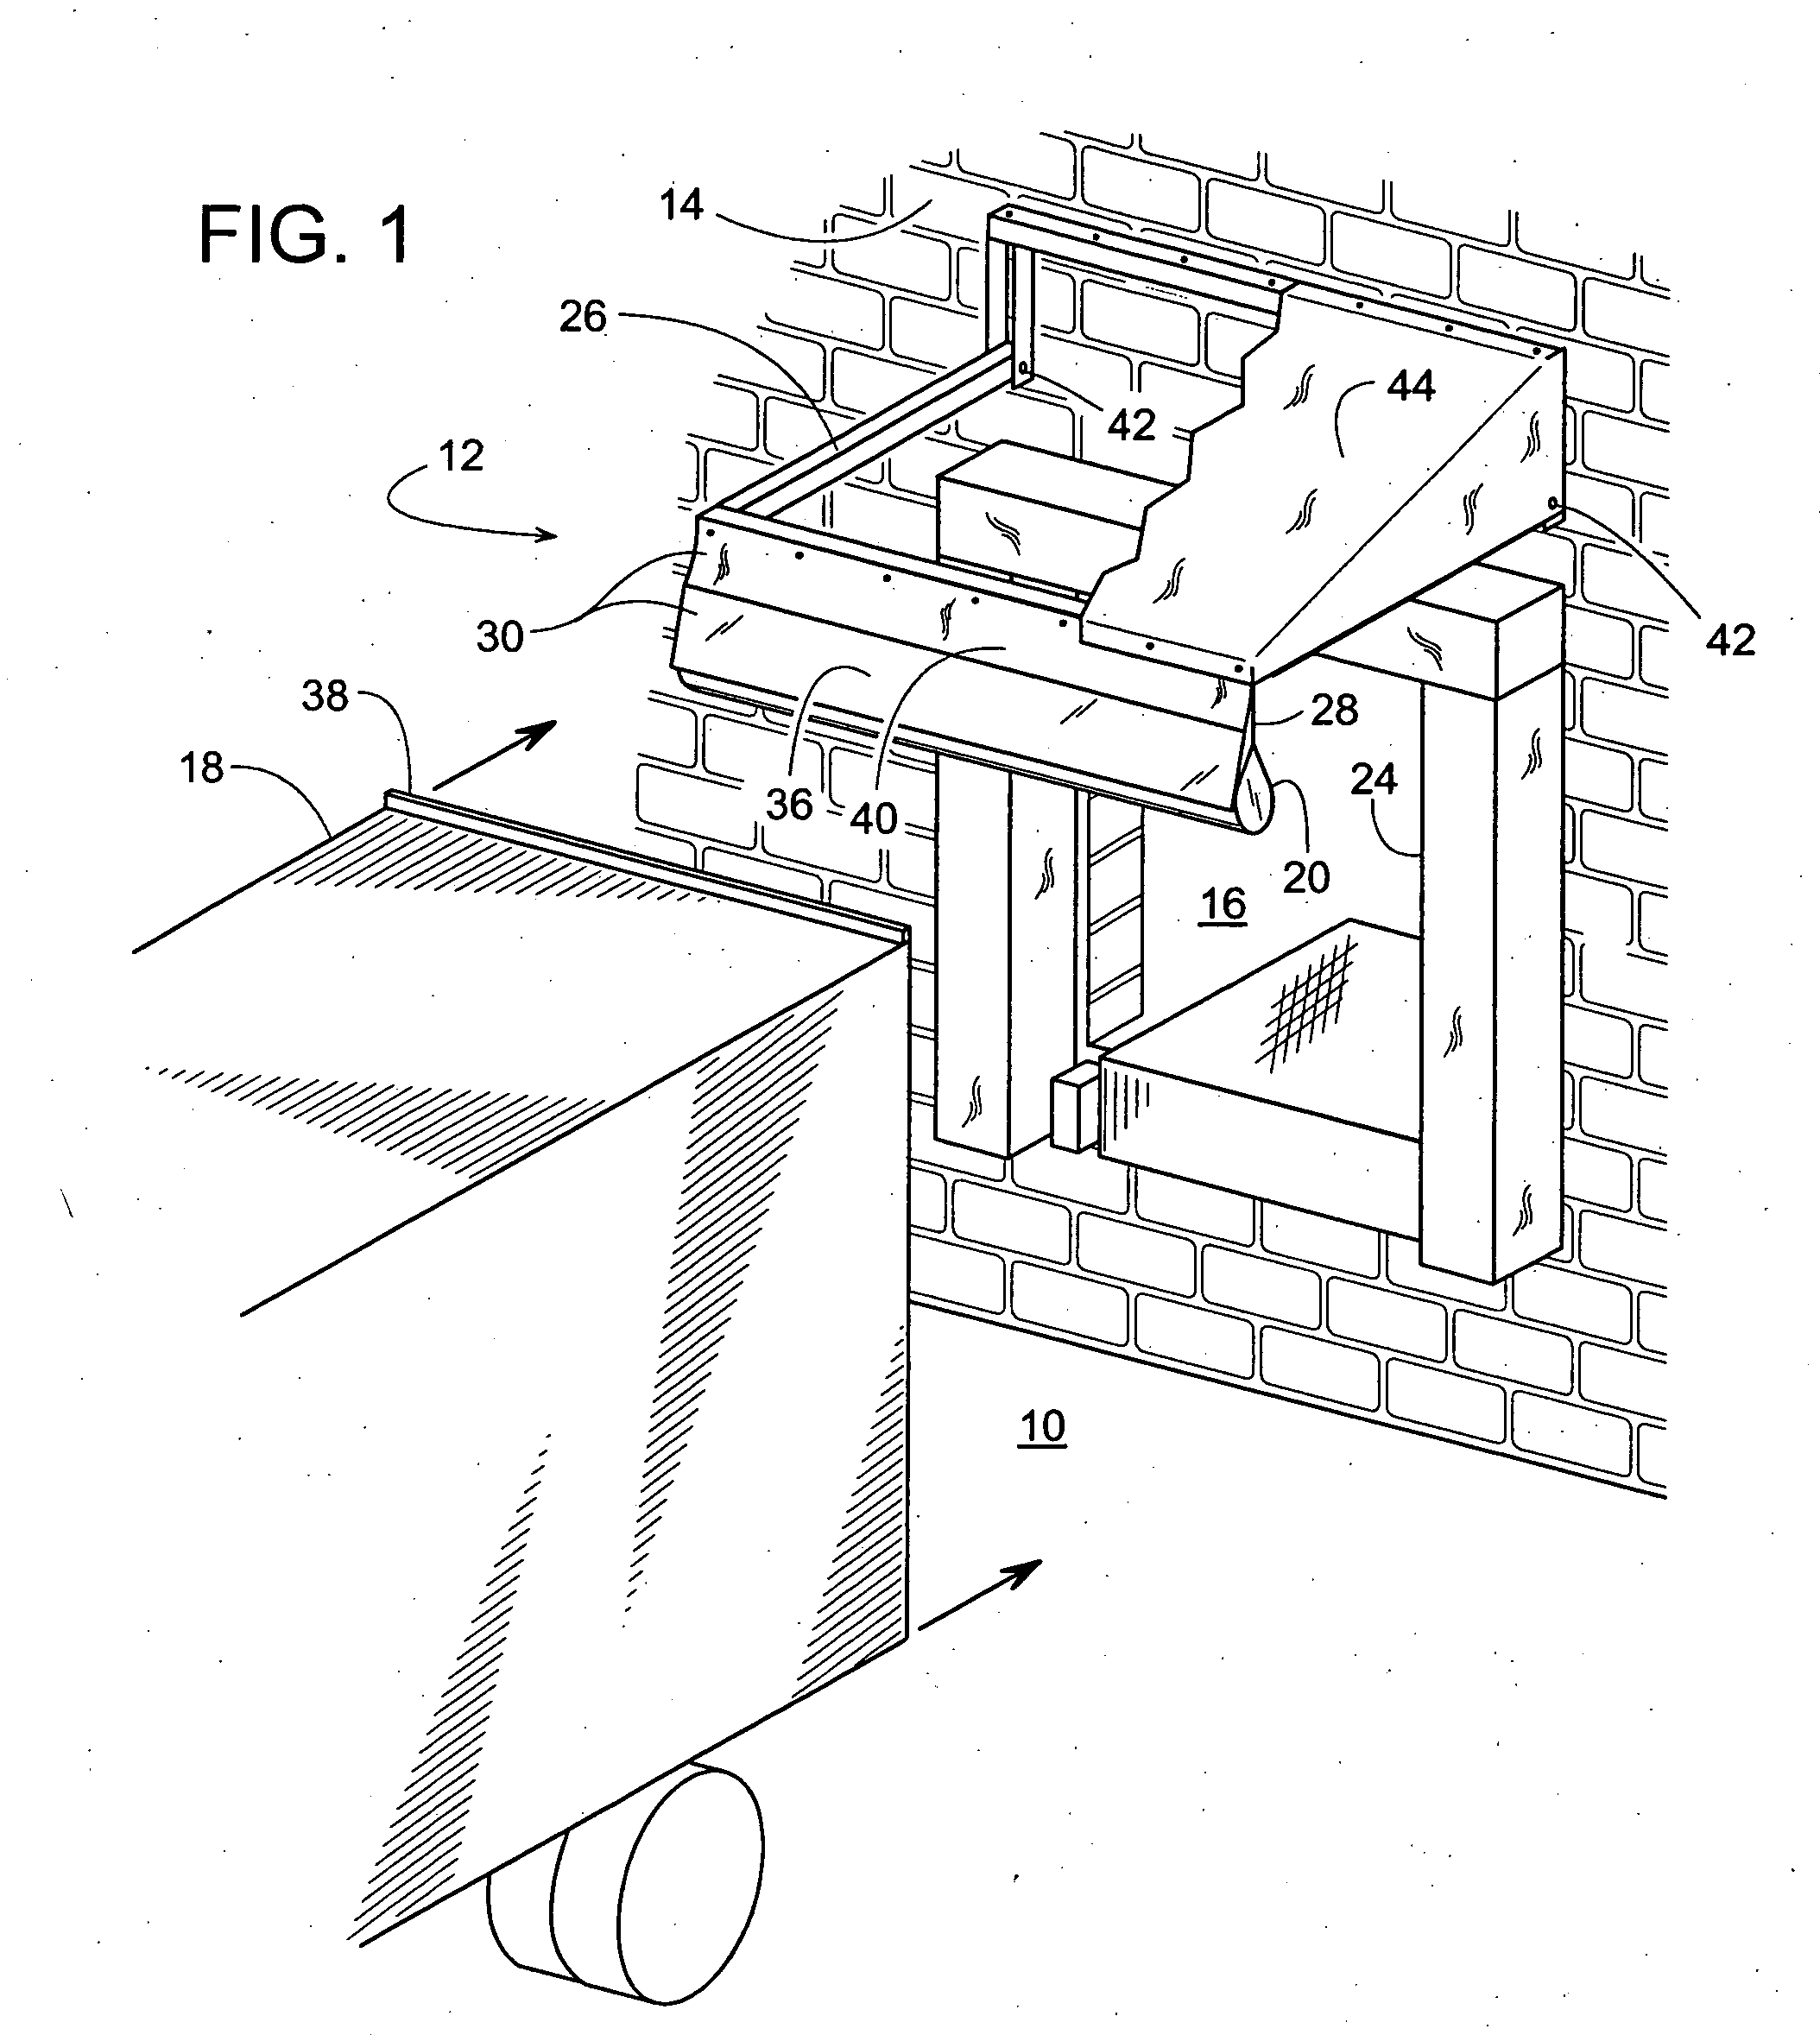 Water runoff deflector for a vehicle at a loading dock